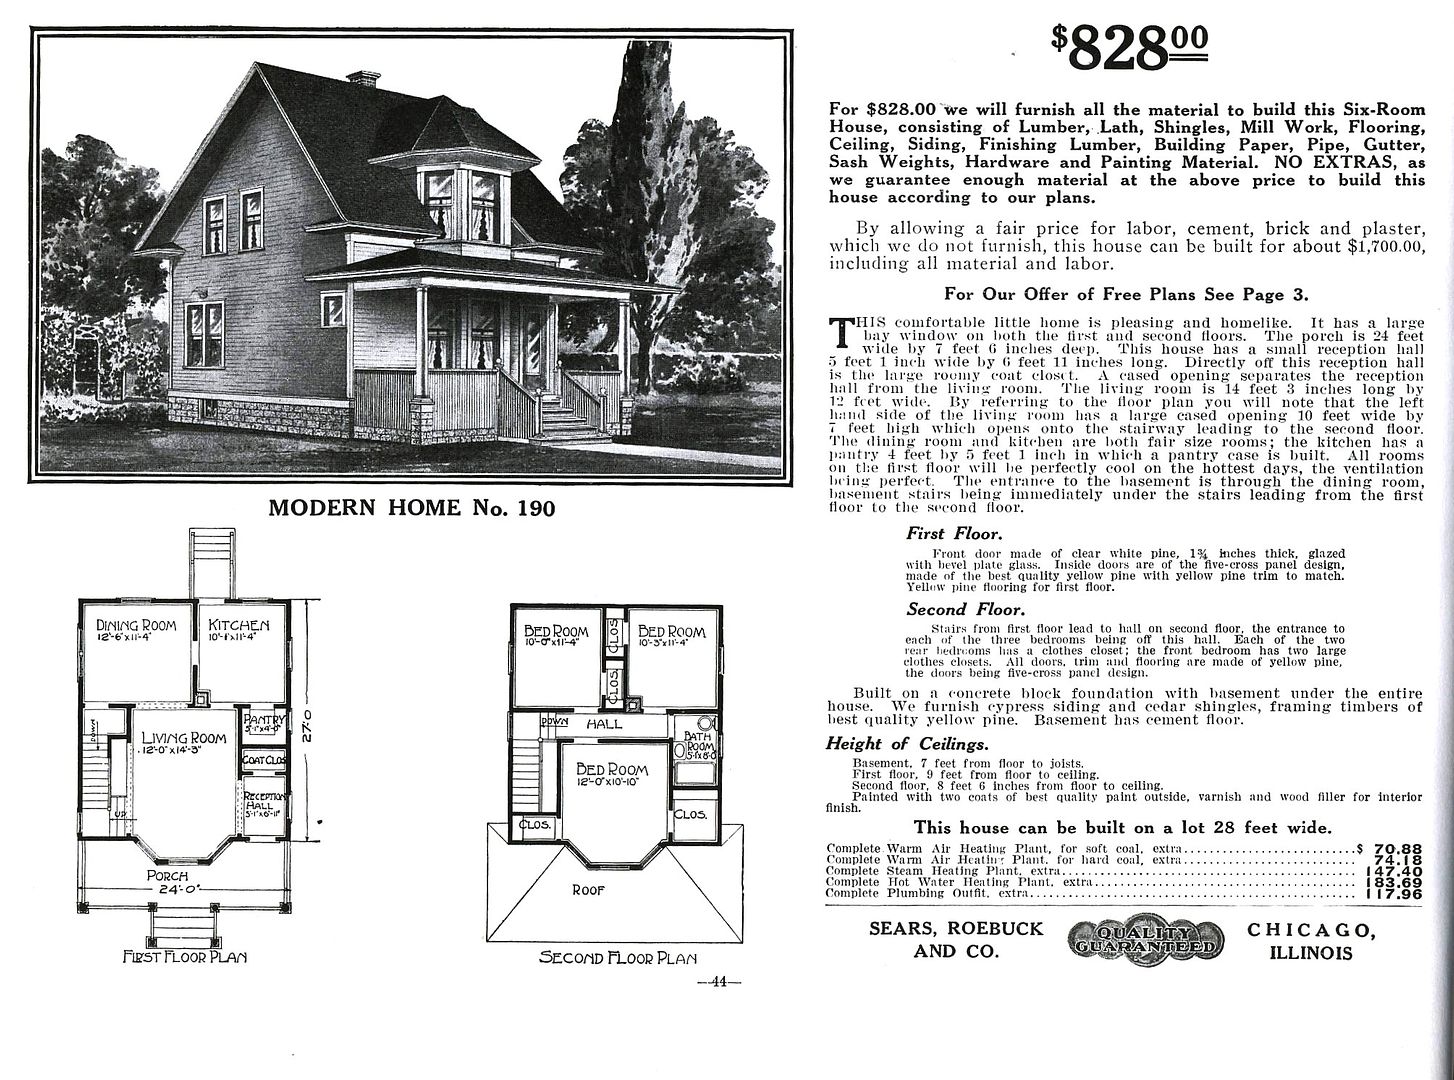 This was Sears Modern Home #190, offered in the early 1910s. 